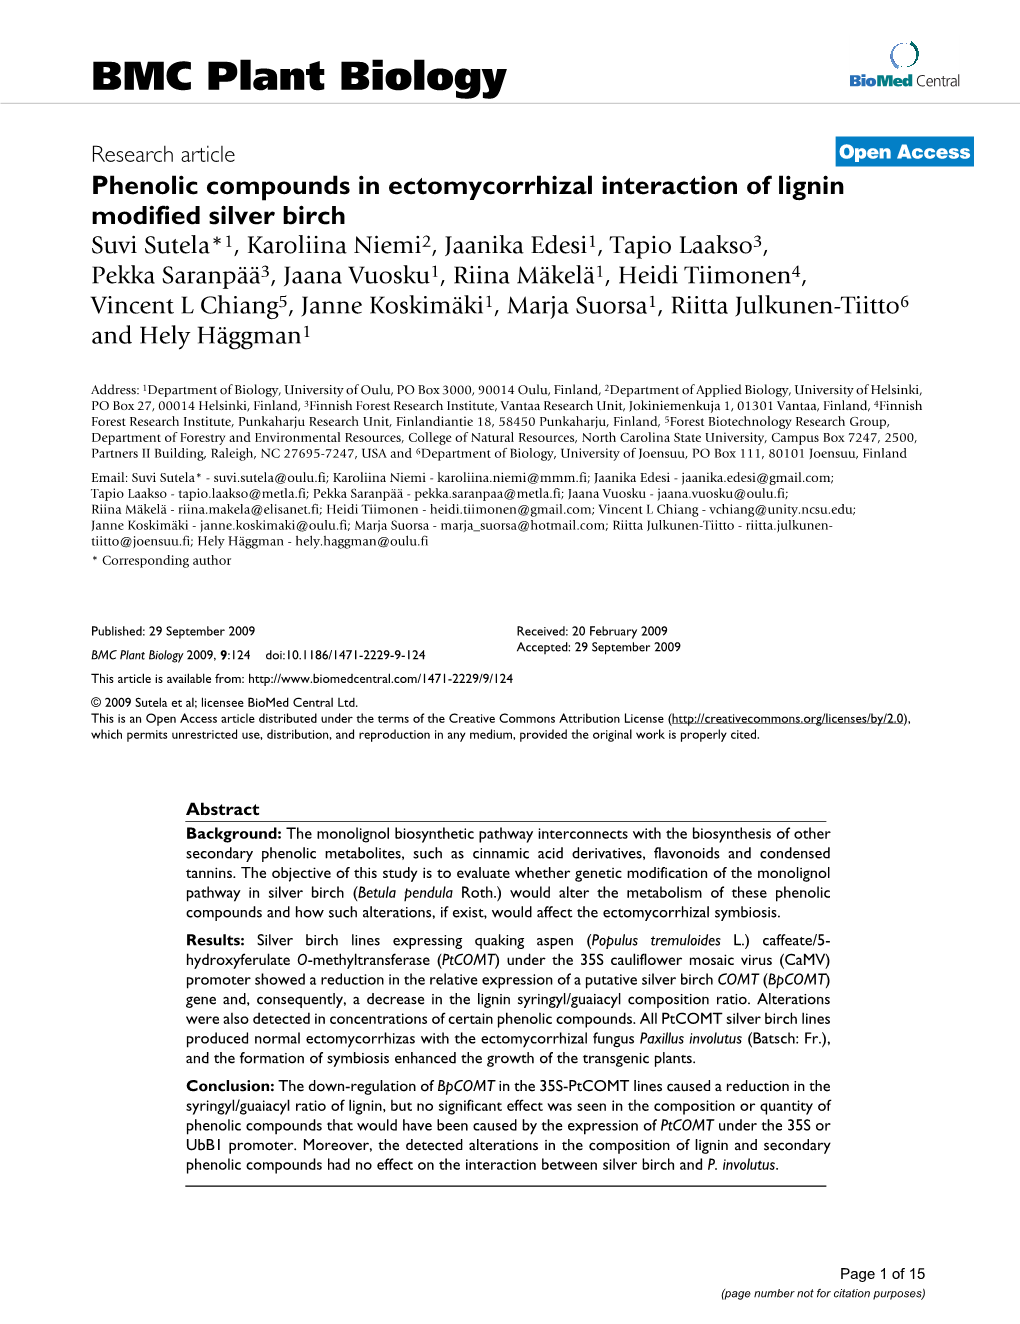 Phenolic Compounds in Ectomycorrhizal Interaction of Lignin Modified Silver Birch